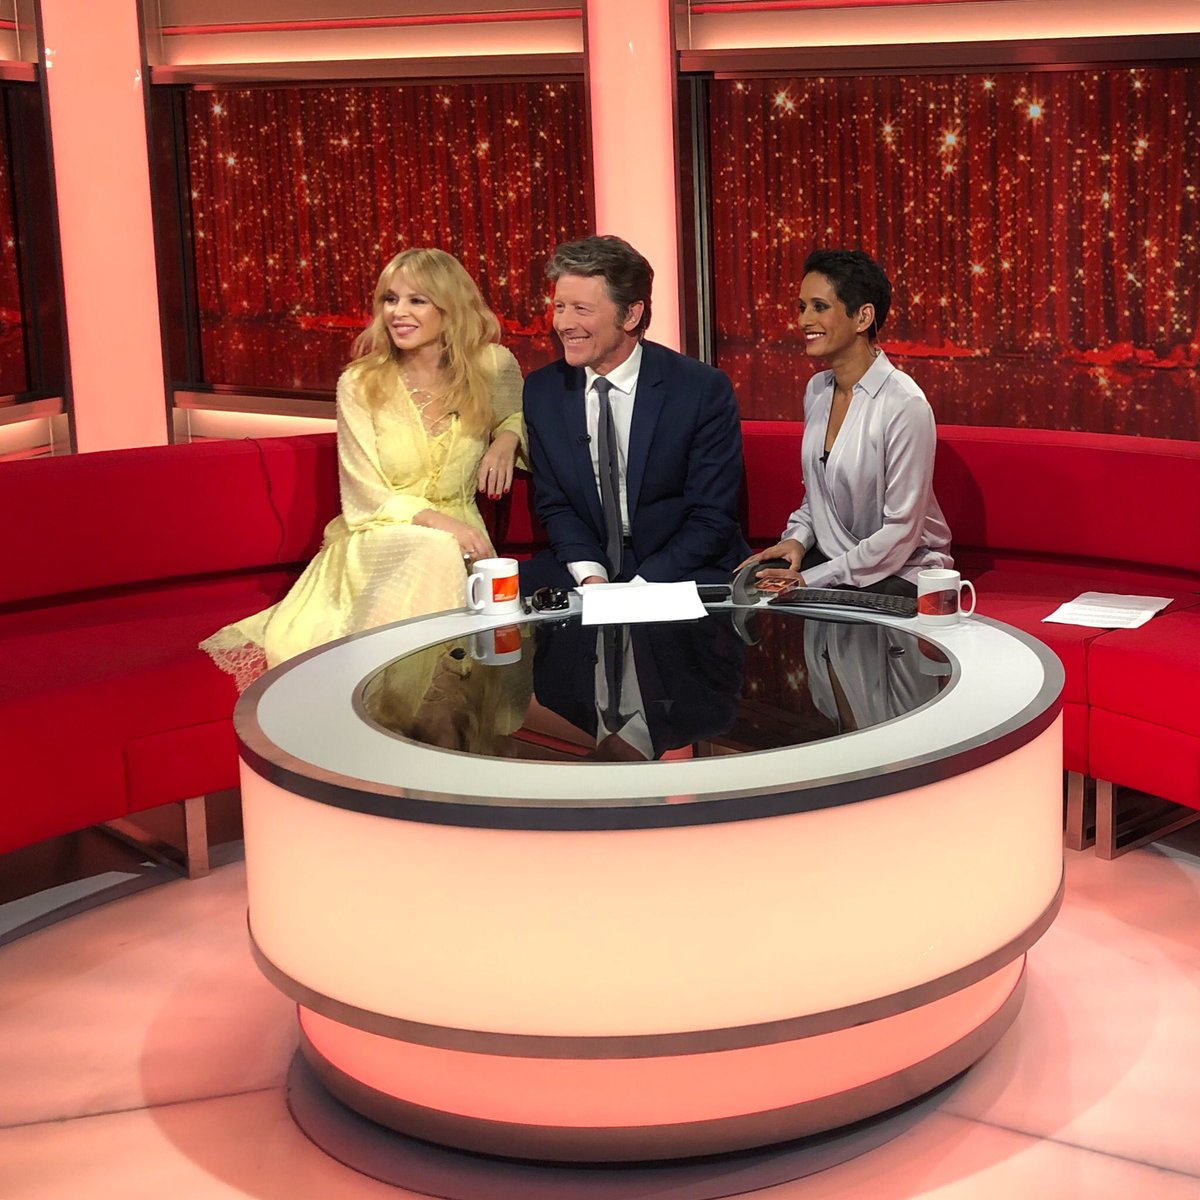 Loved spending time with @BBCNaga, Charlie Stayt and the @BBCBreakfast team! ???????? https://t.co/J0NhTXU9mu